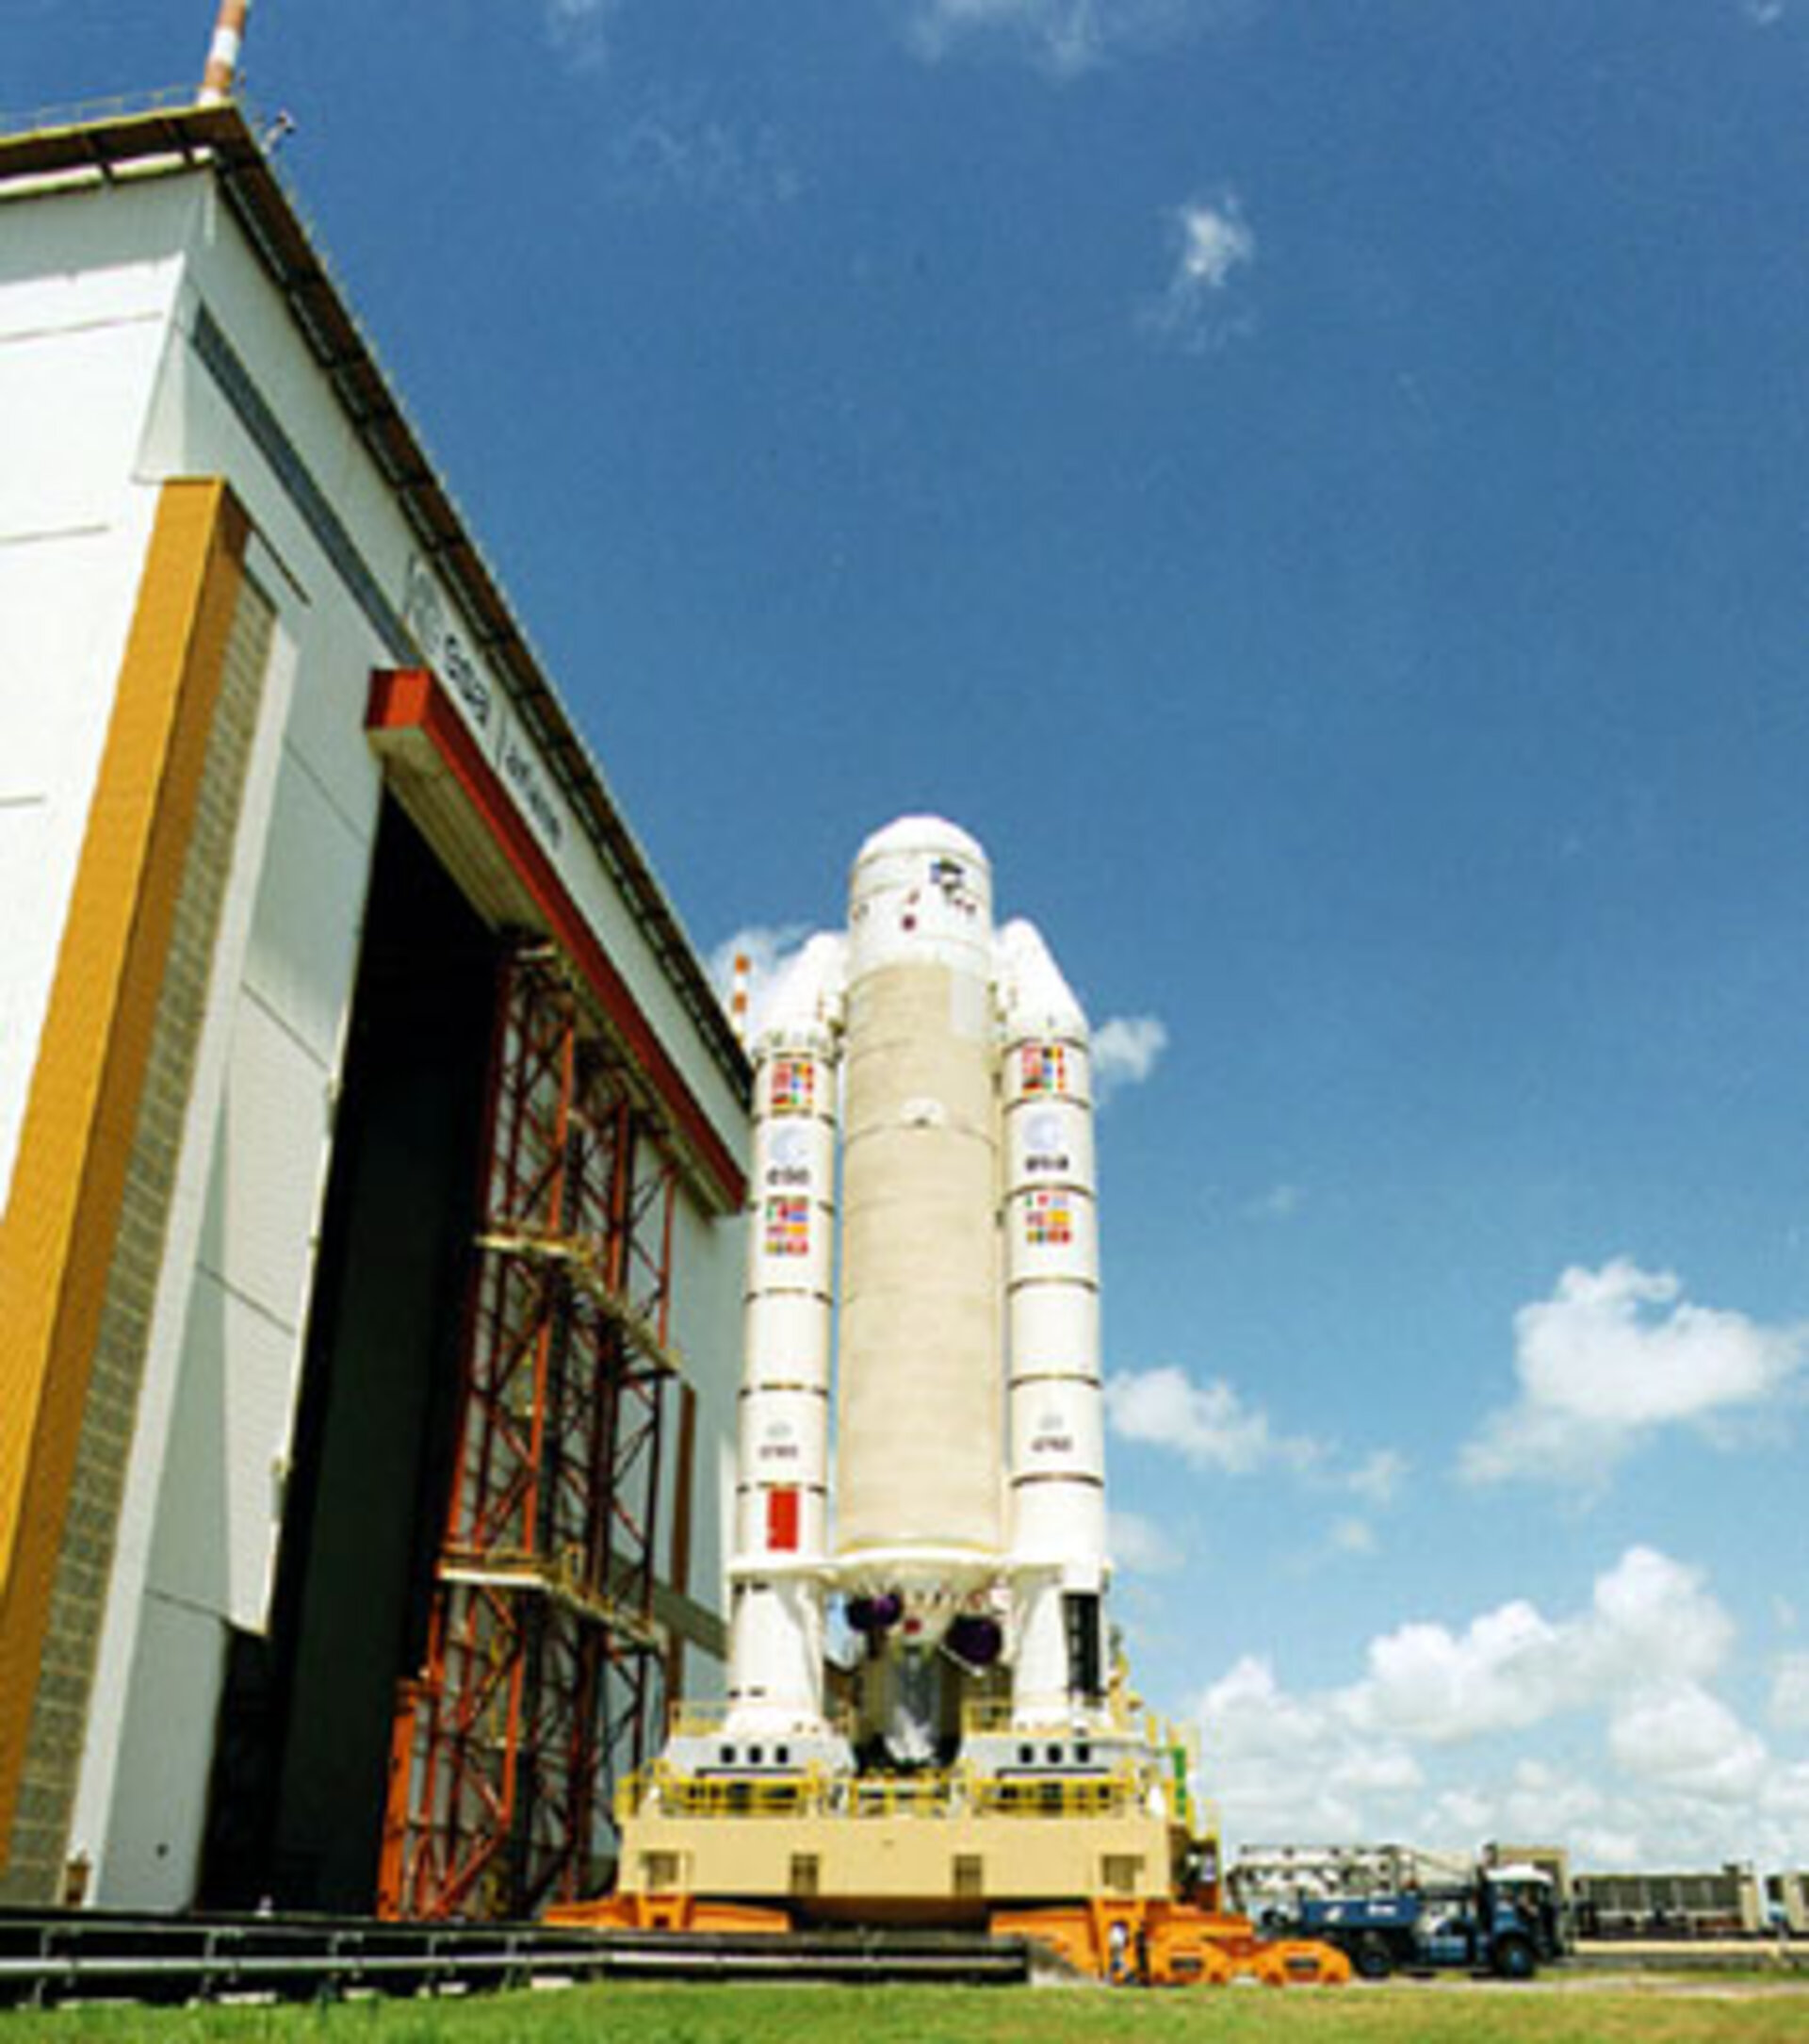 Final assembly building at Kourou